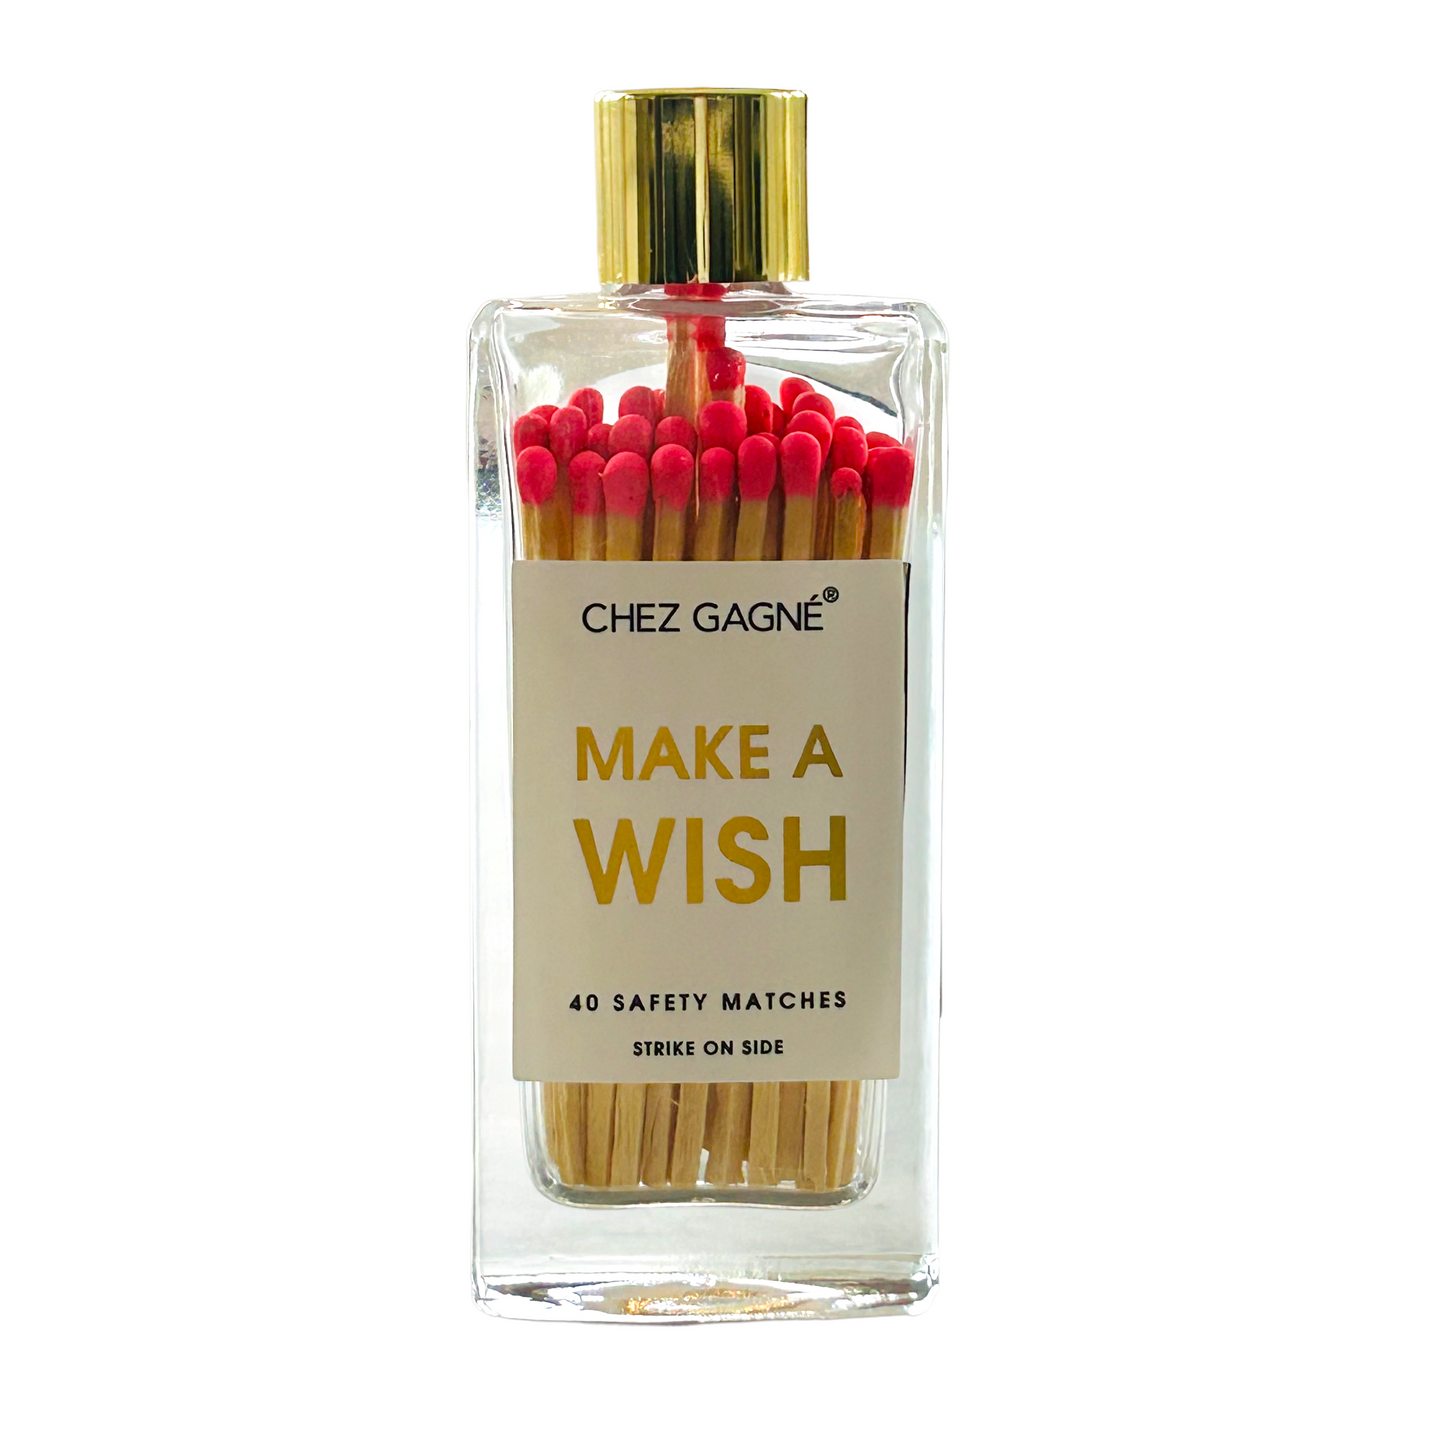 “Make A Wish” Safety Matches - Curated Home Decor